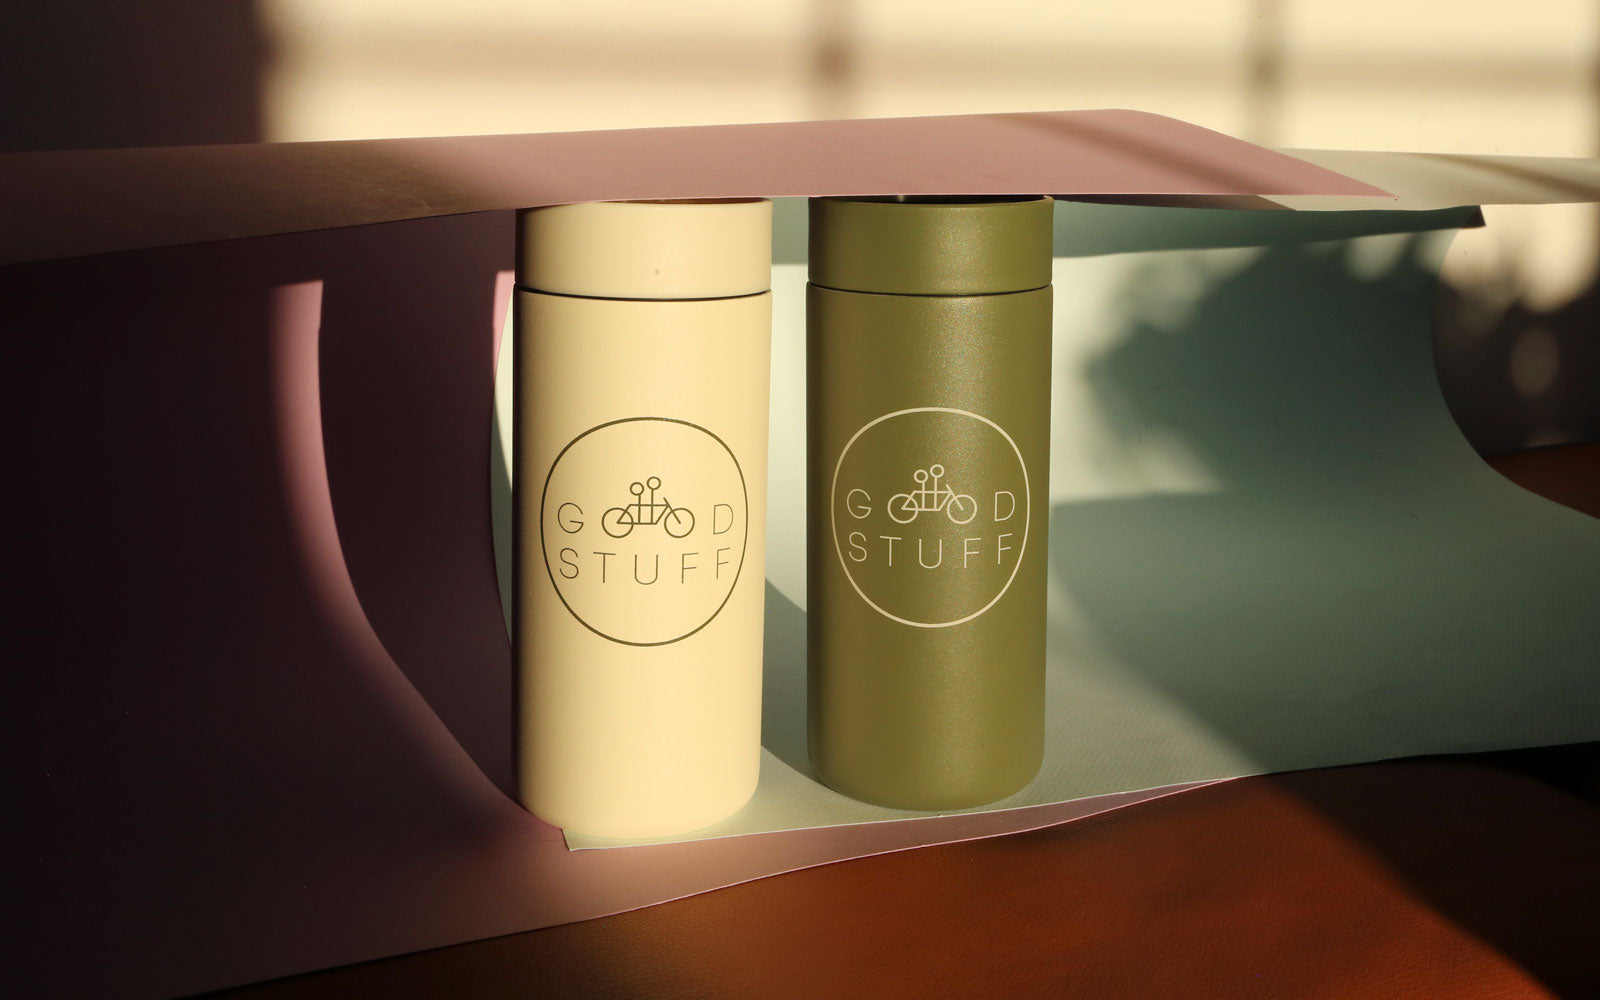 Two cylindrical containers labeled "good stuff" sit on a table, bathed in warm sunlight, casting soft shadows. one container is cream-colored and the other is olive green.